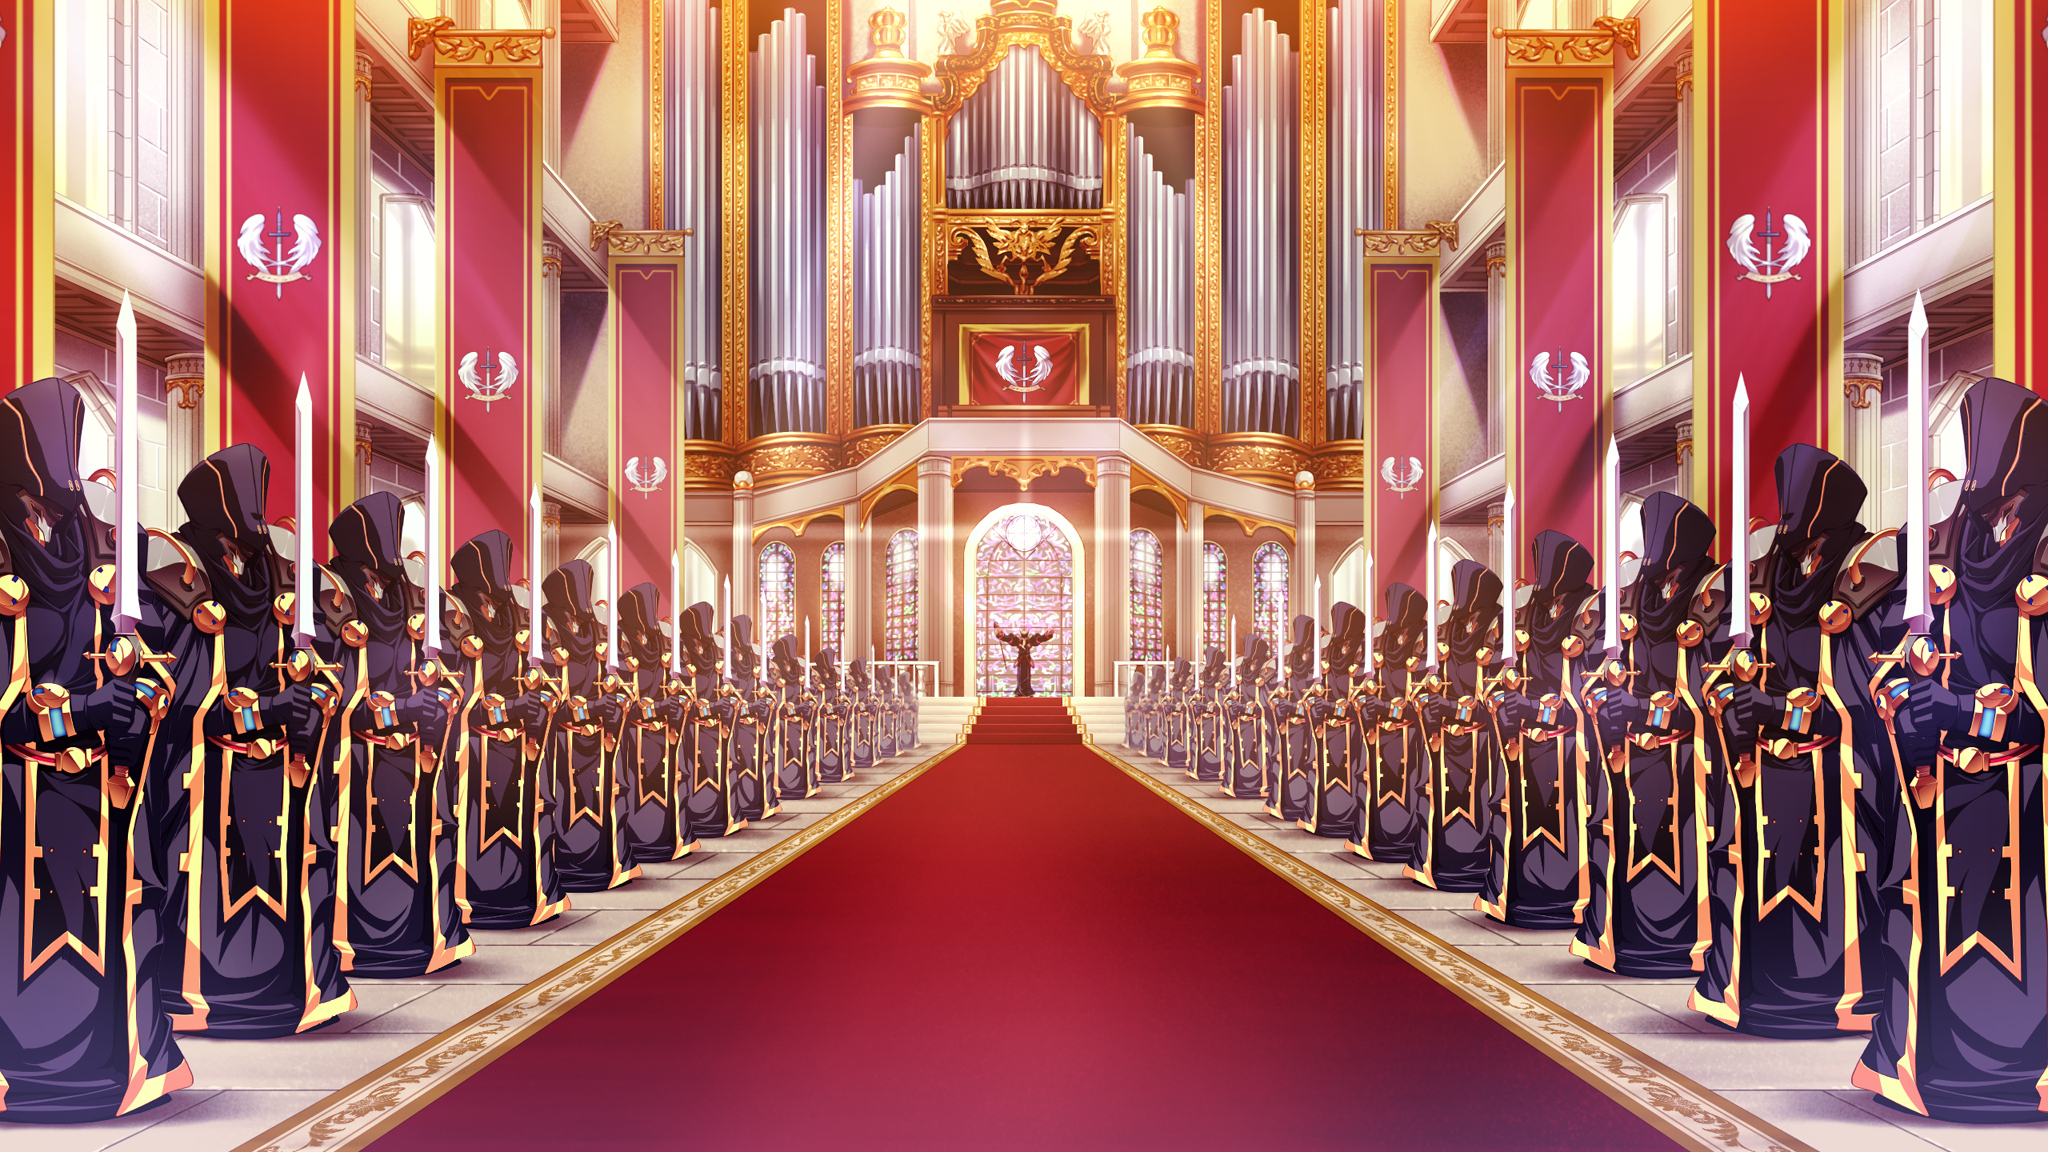 Throne Room With Guards - HD Wallpaper 